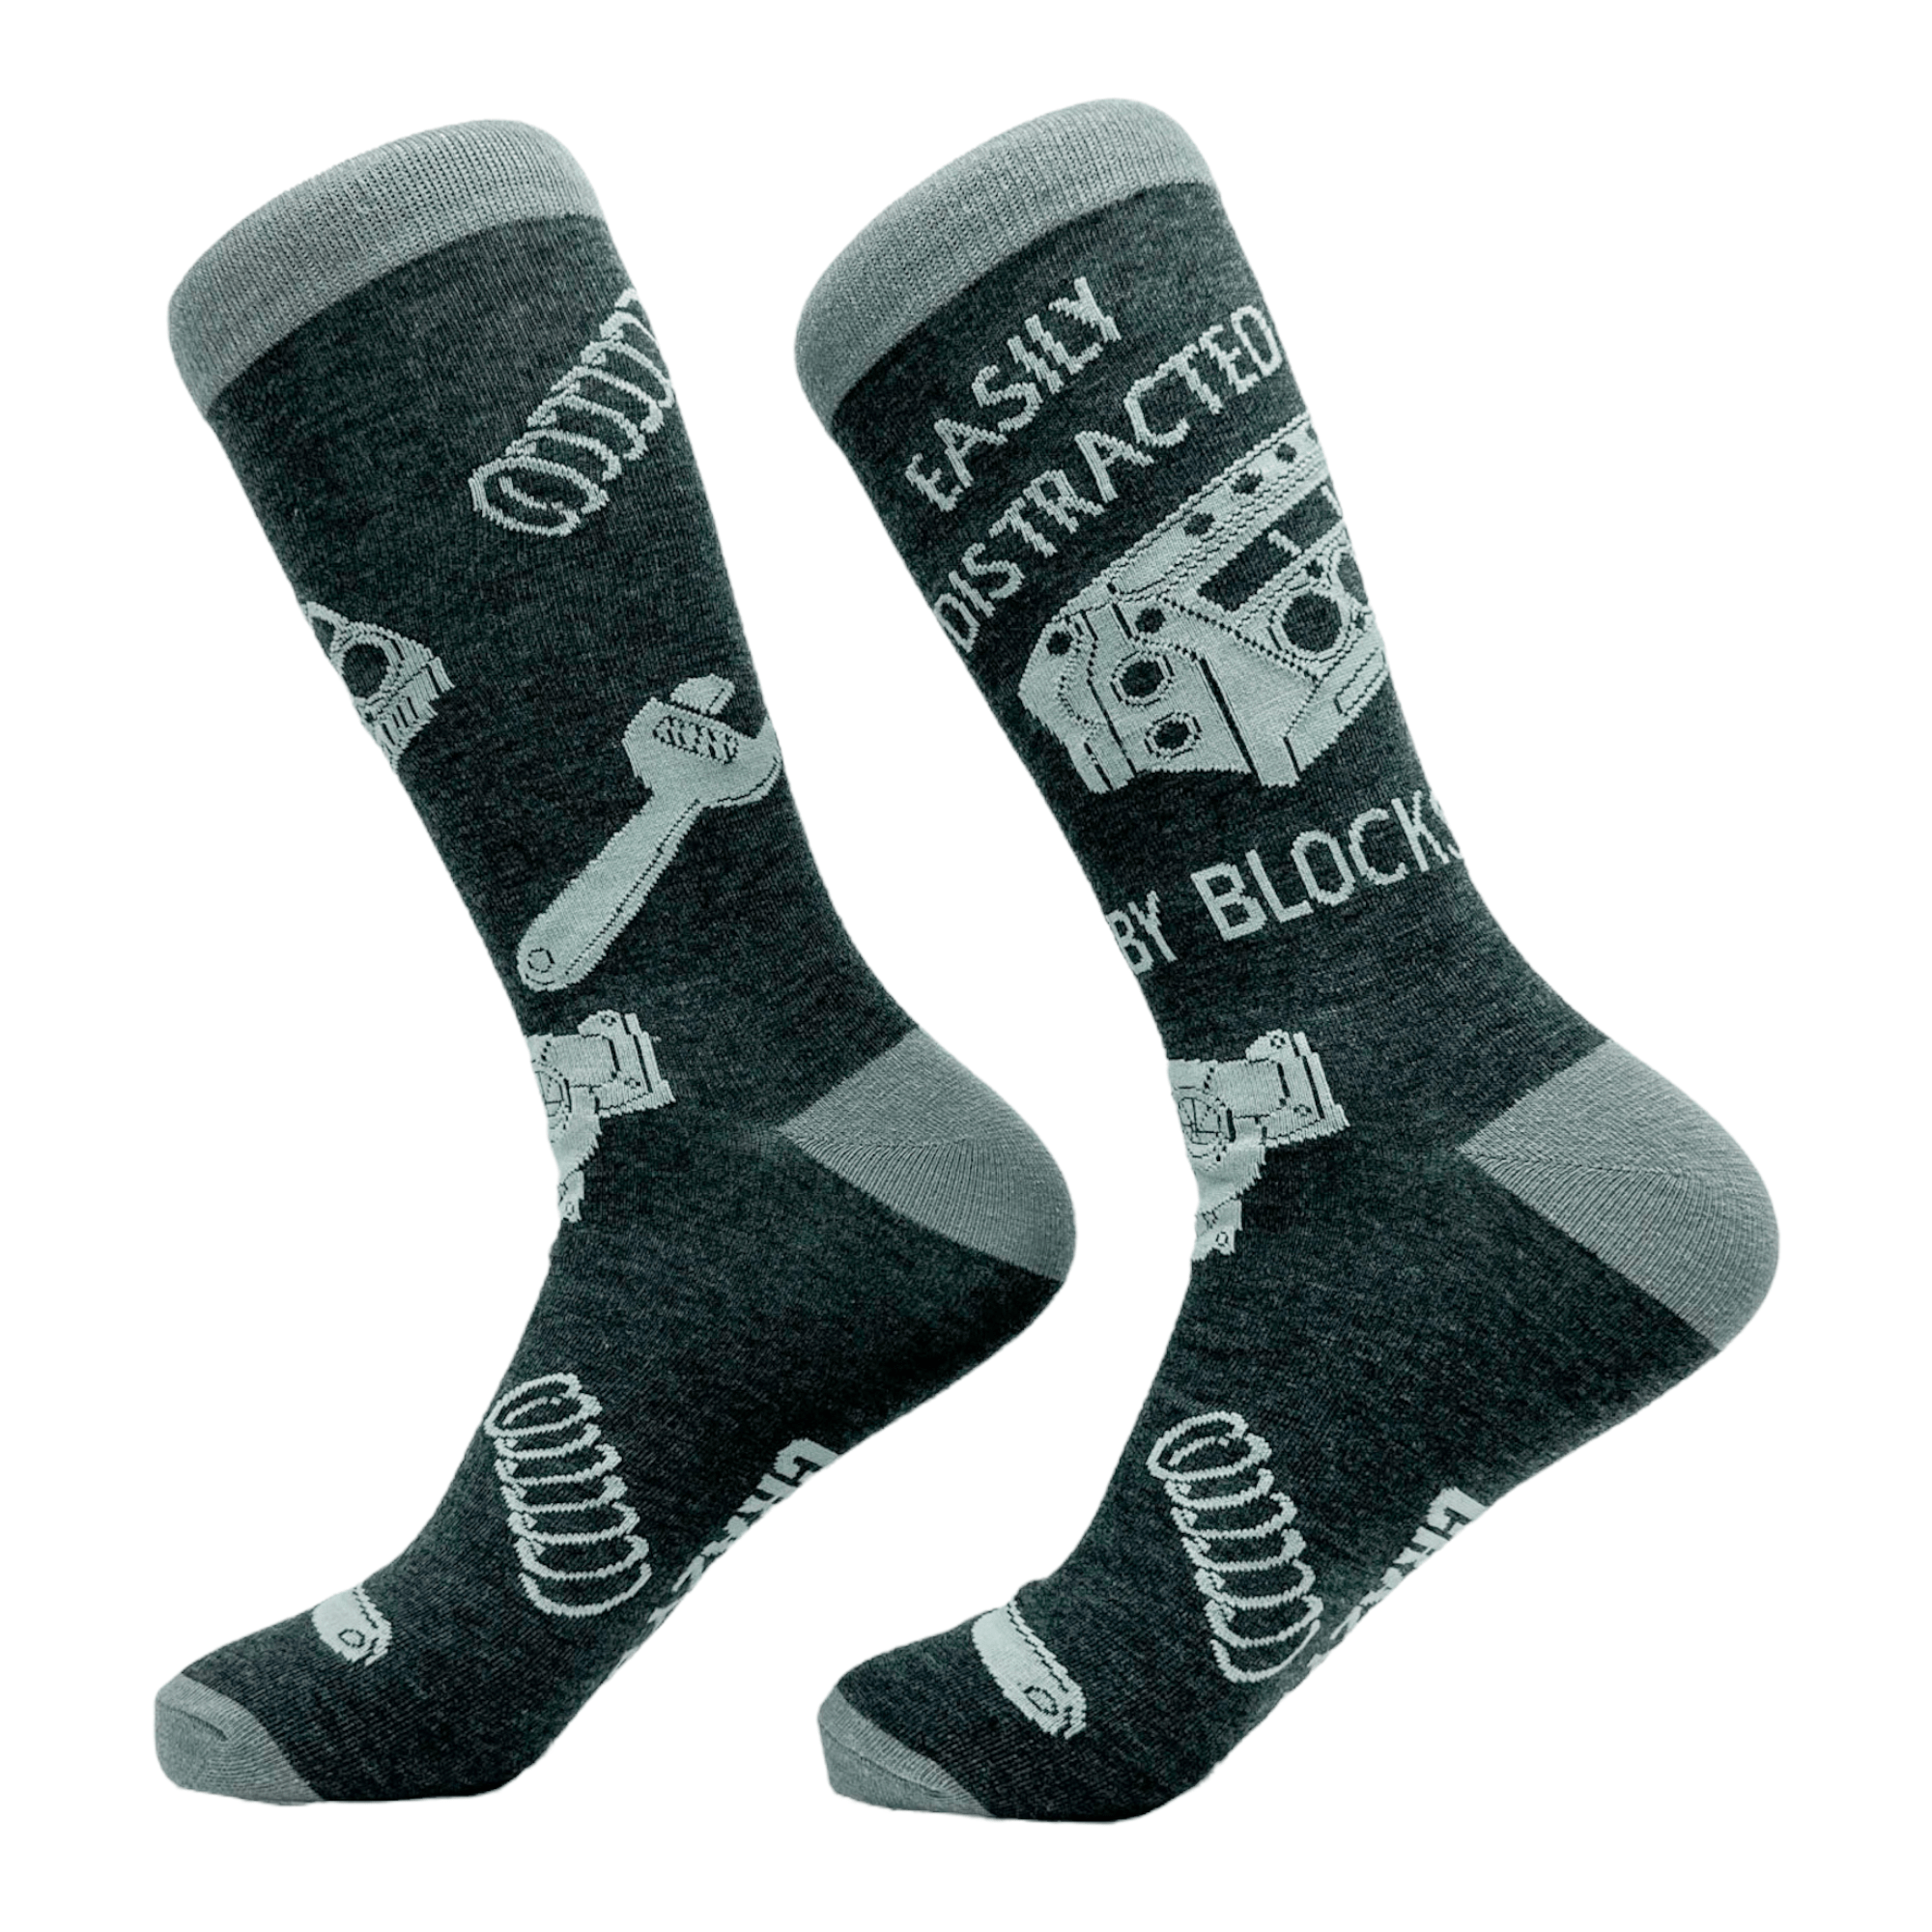 Men's Easily Distracted By Blocks Socks  -  Crazy Dog T-Shirts